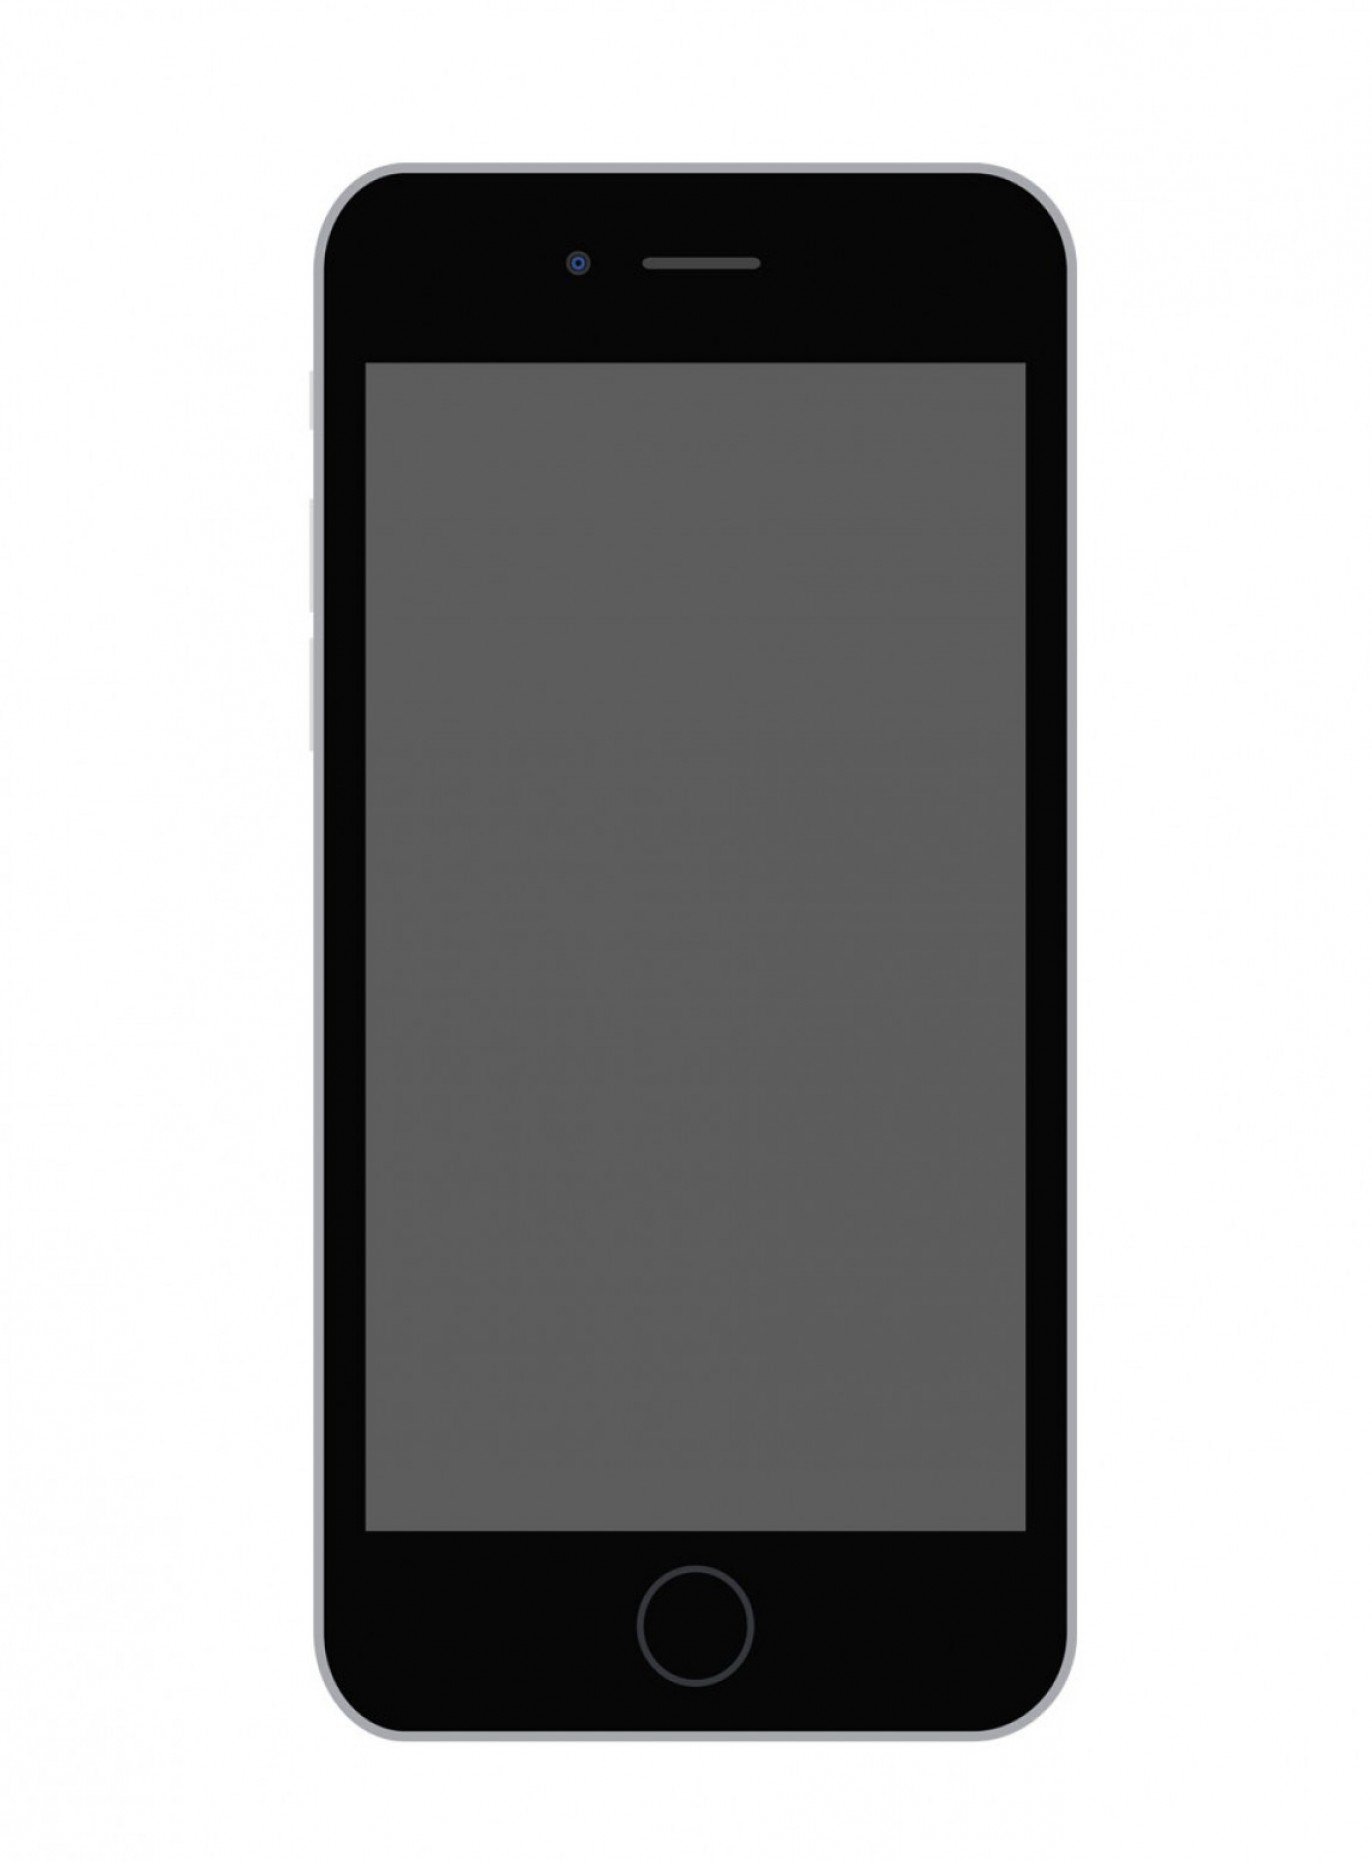 Download Iphone Mockup Vector at Vectorified.com | Collection of ...